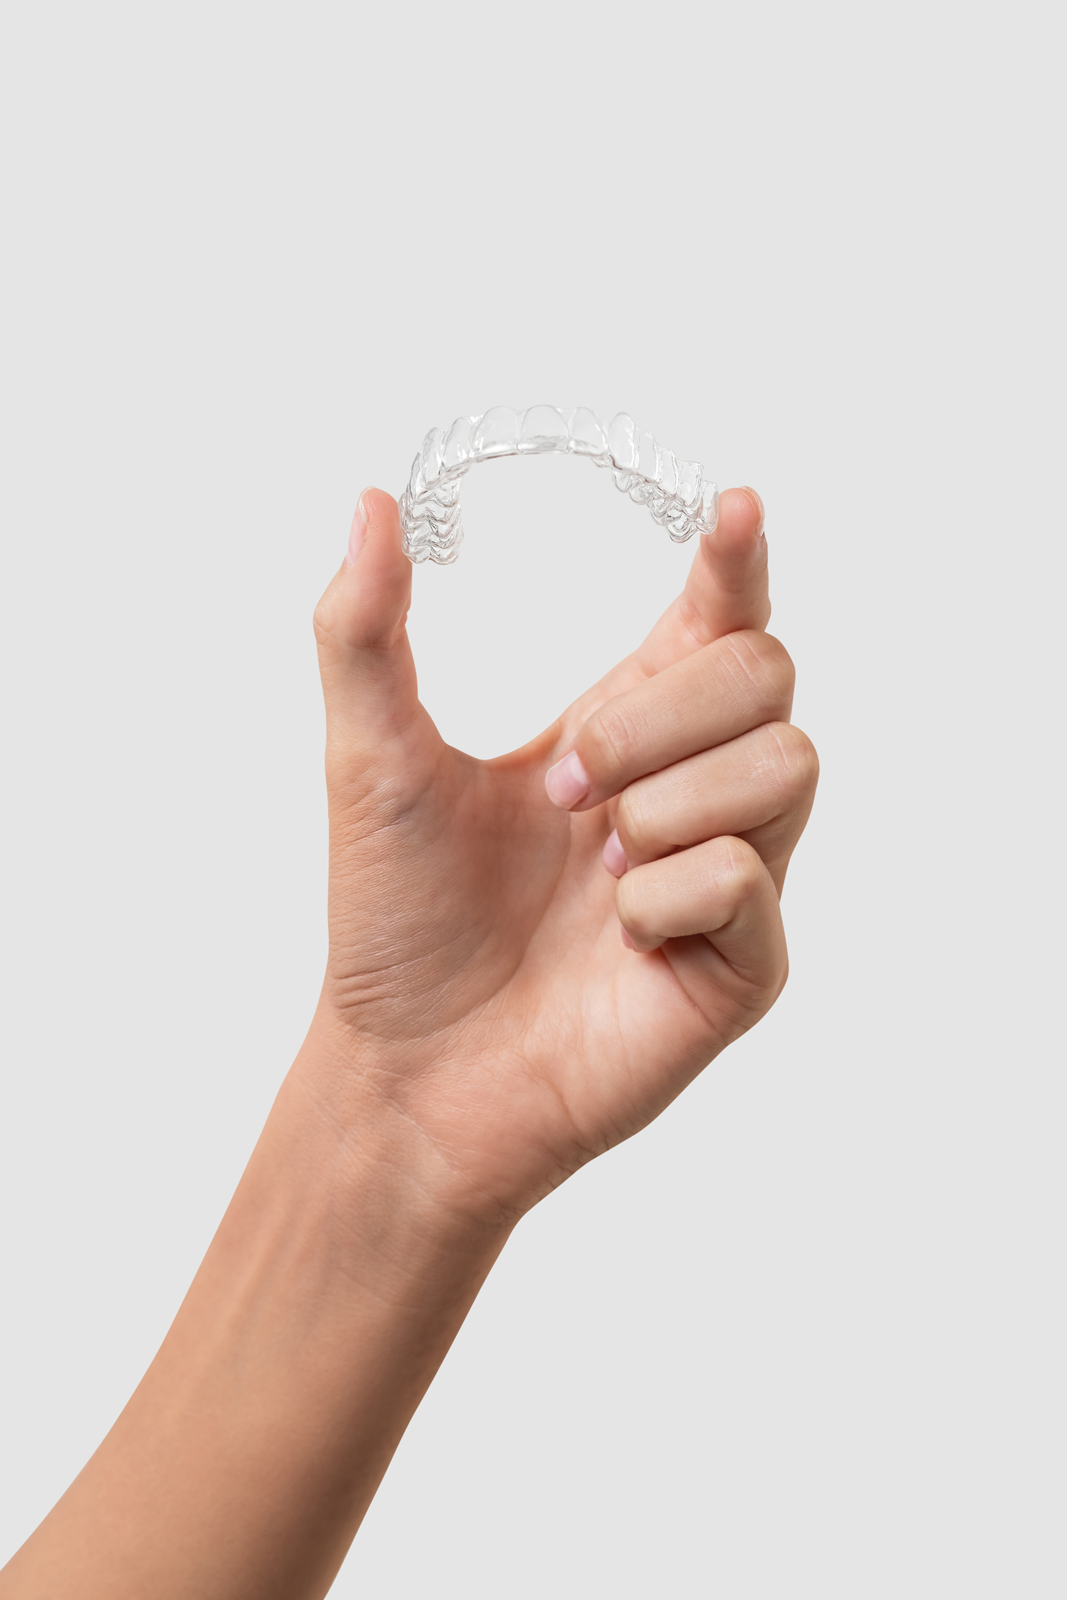 Reveal Clear Aligners Promotion